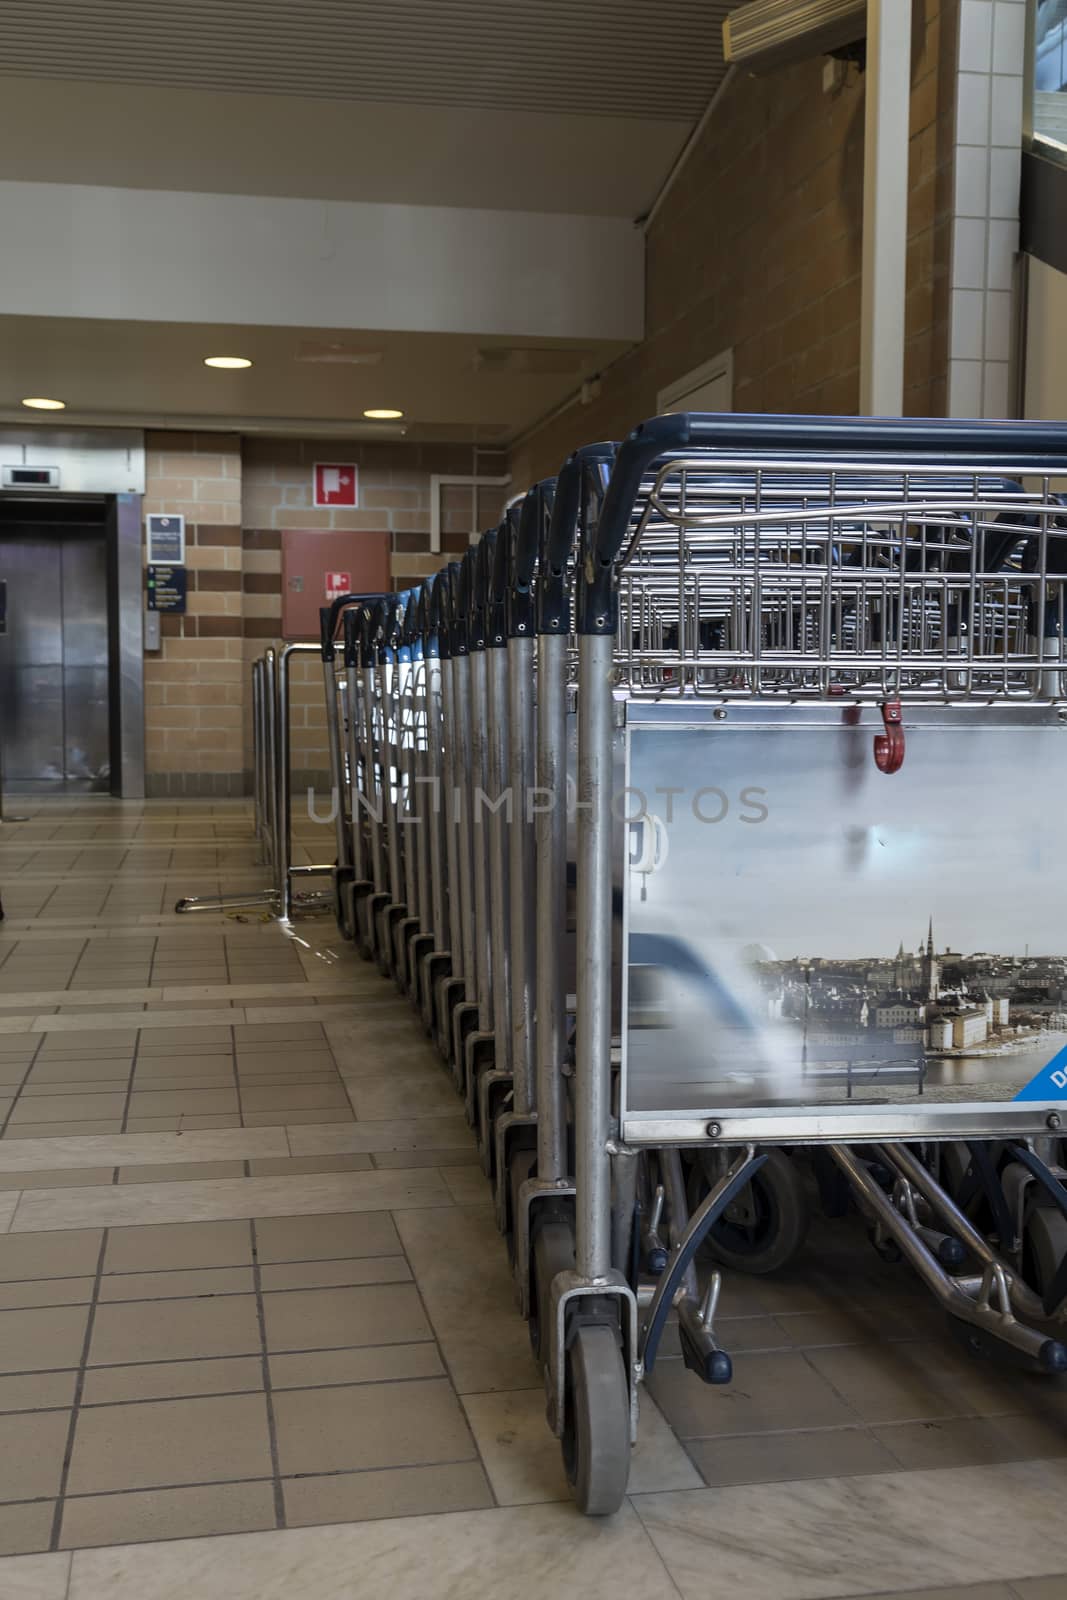 Trolleys in an airport for transporting luggage